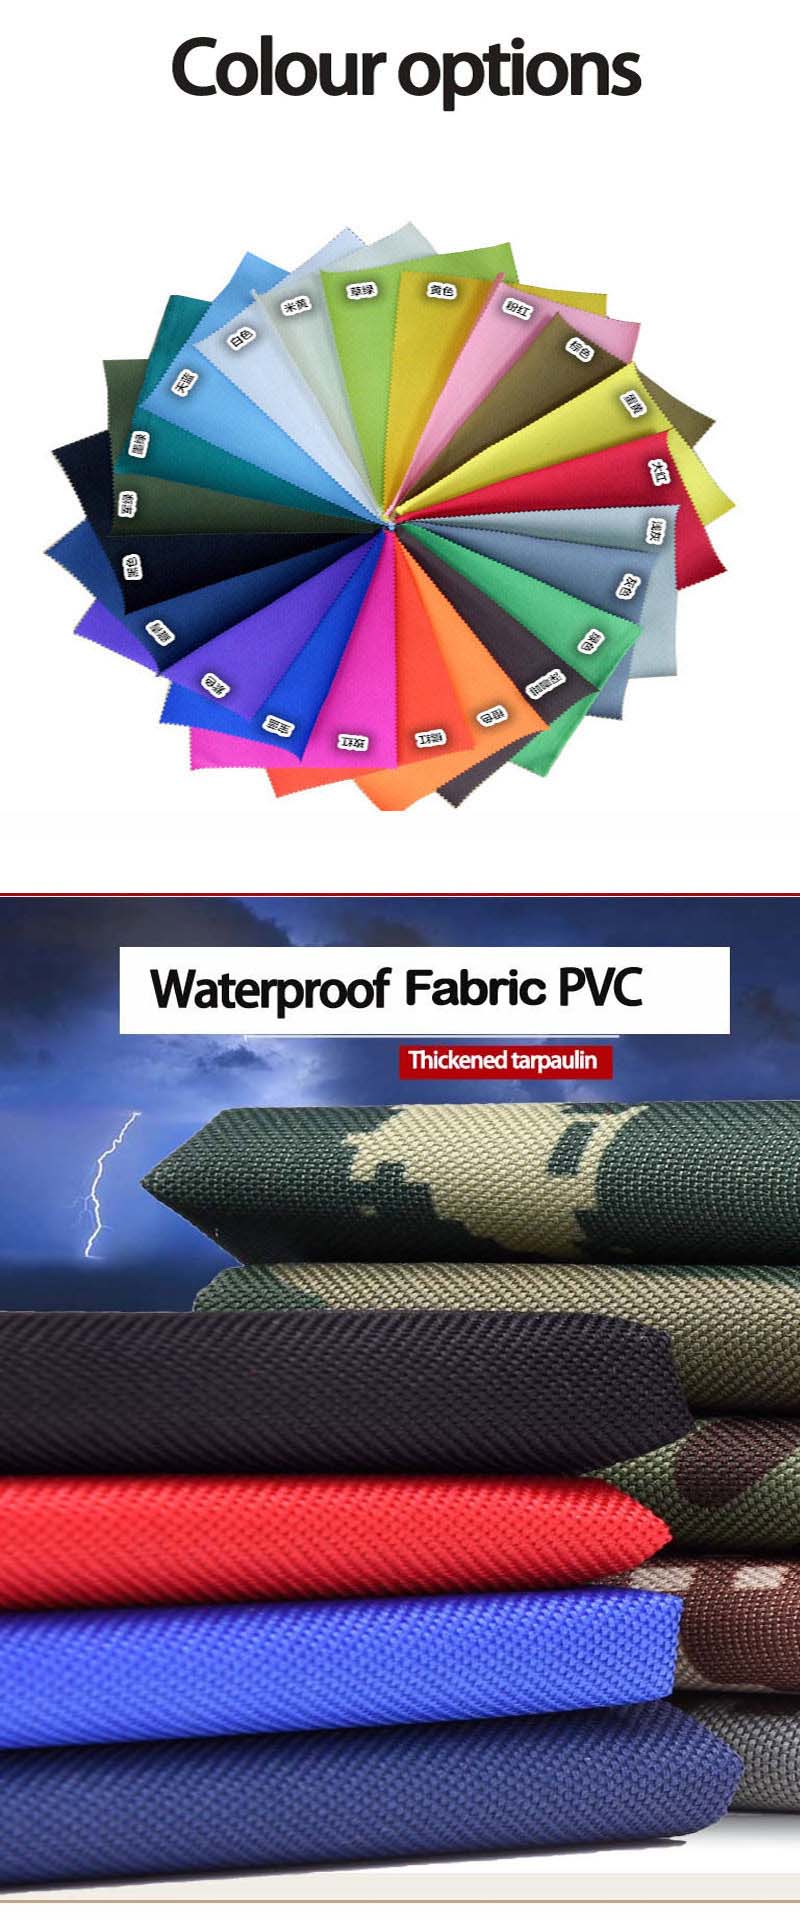 Waterproof Family Foldable Tents